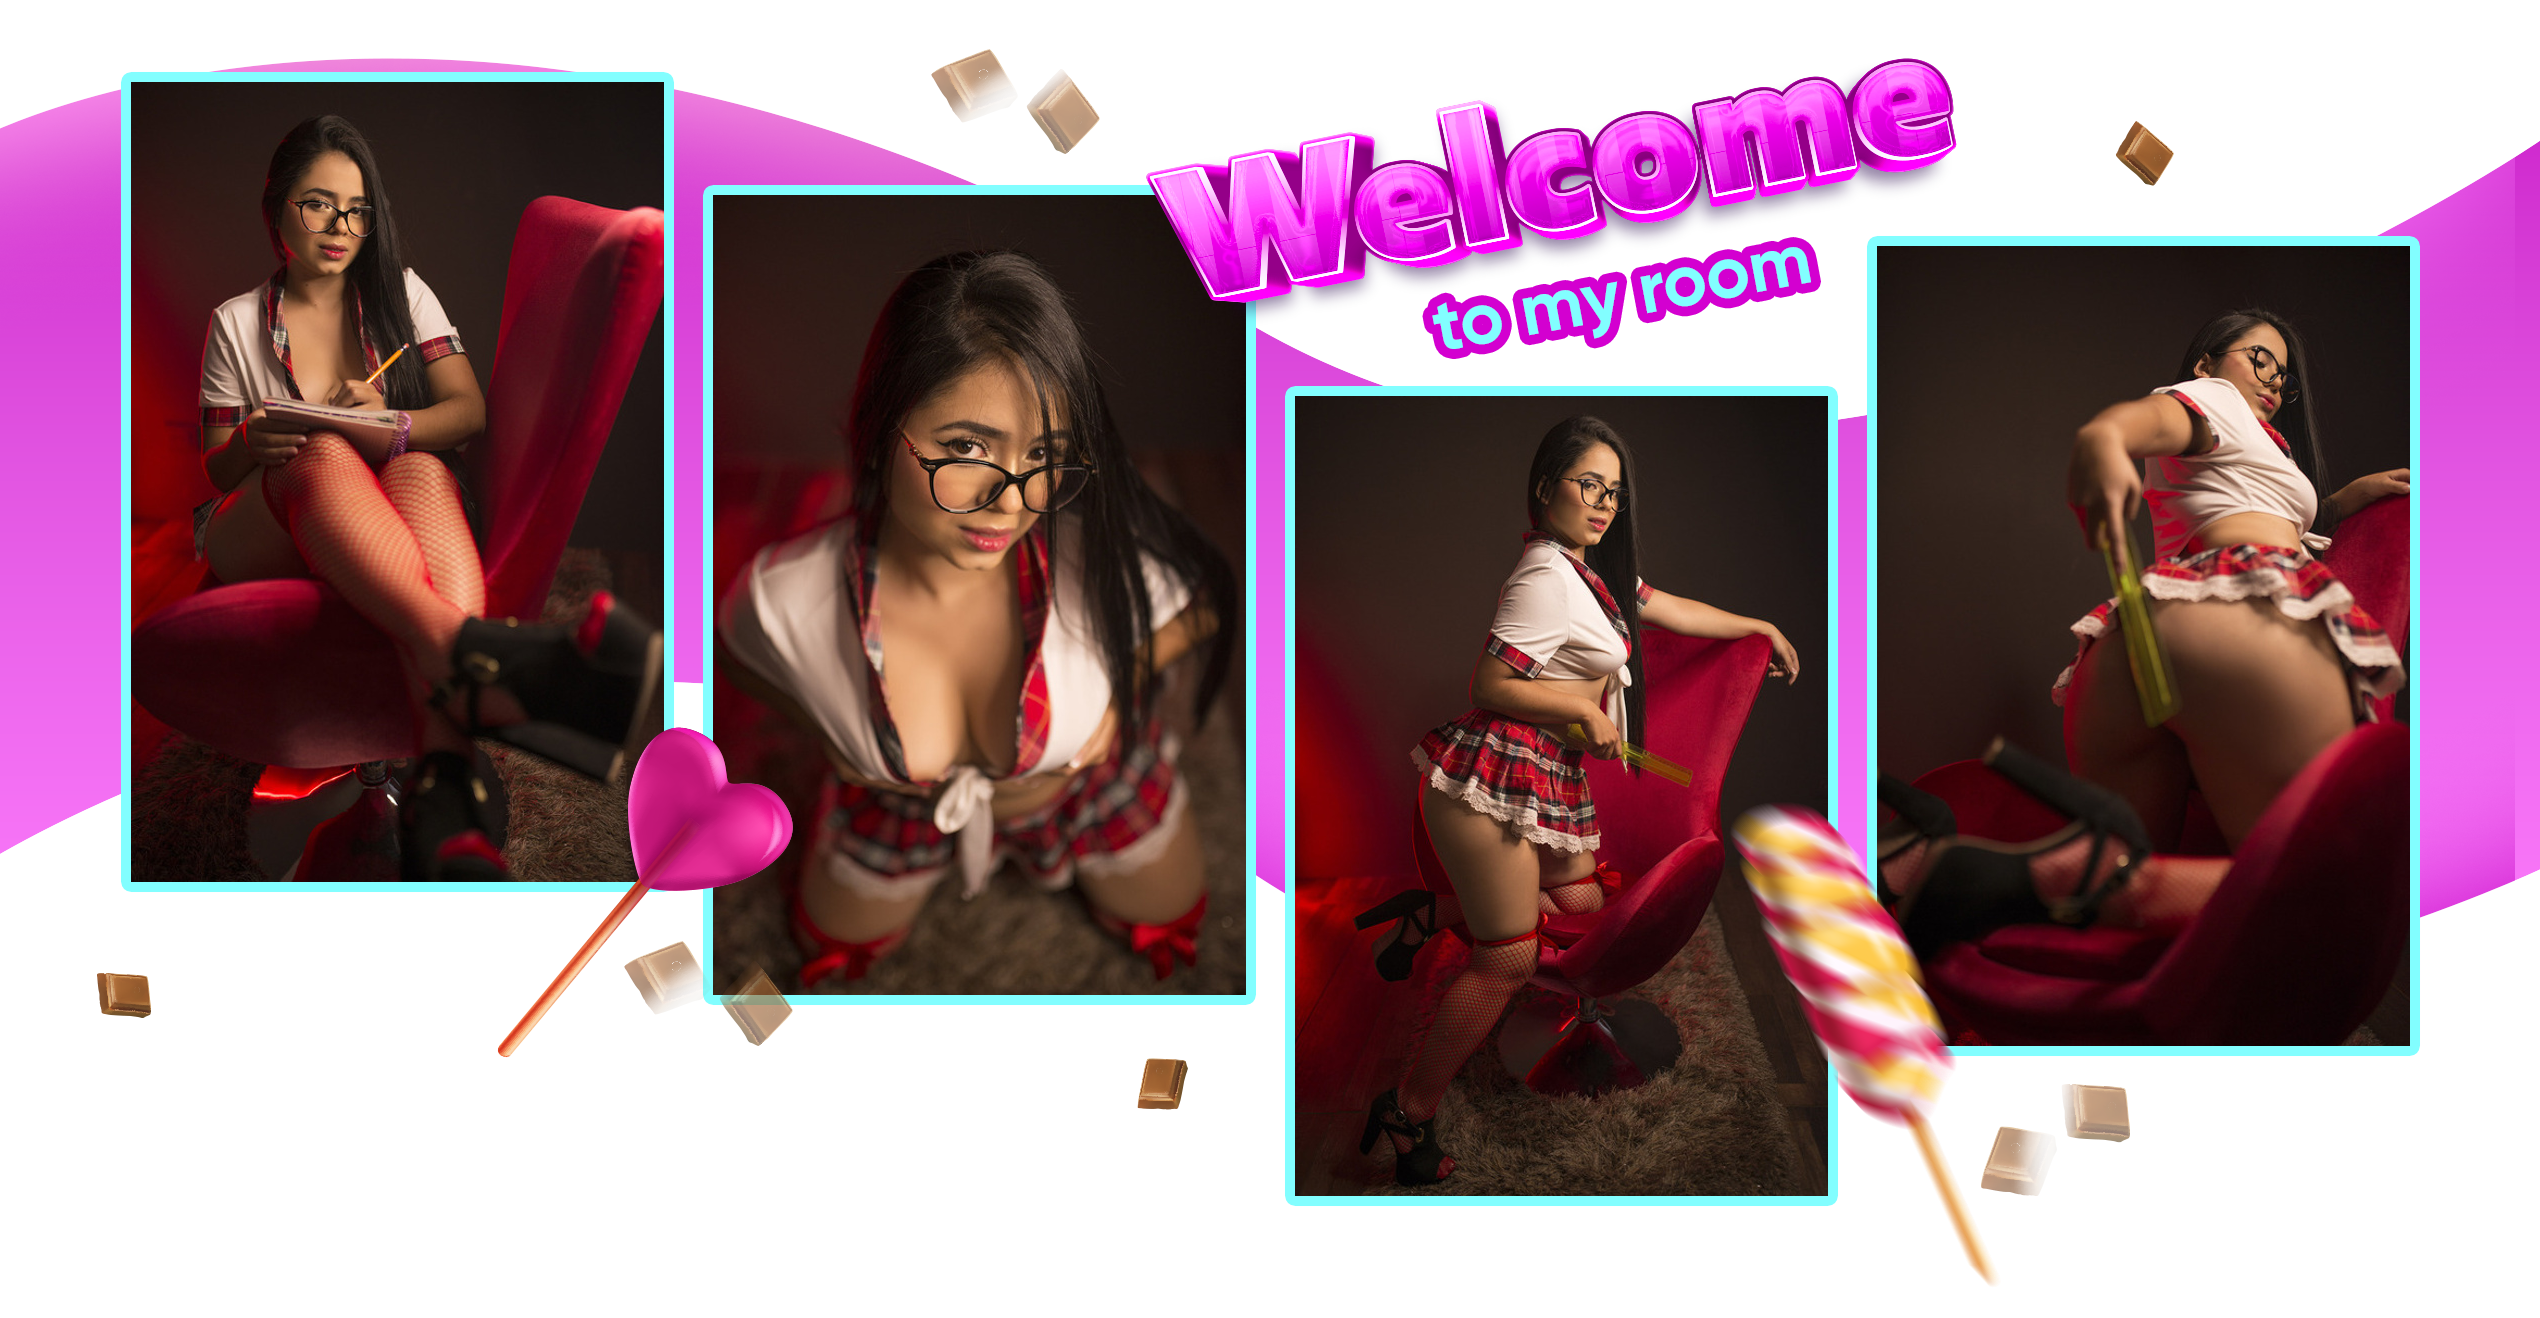 Rachelwhatson Hello. Welcome to the sweetest room. Let's enjoy! image: 9